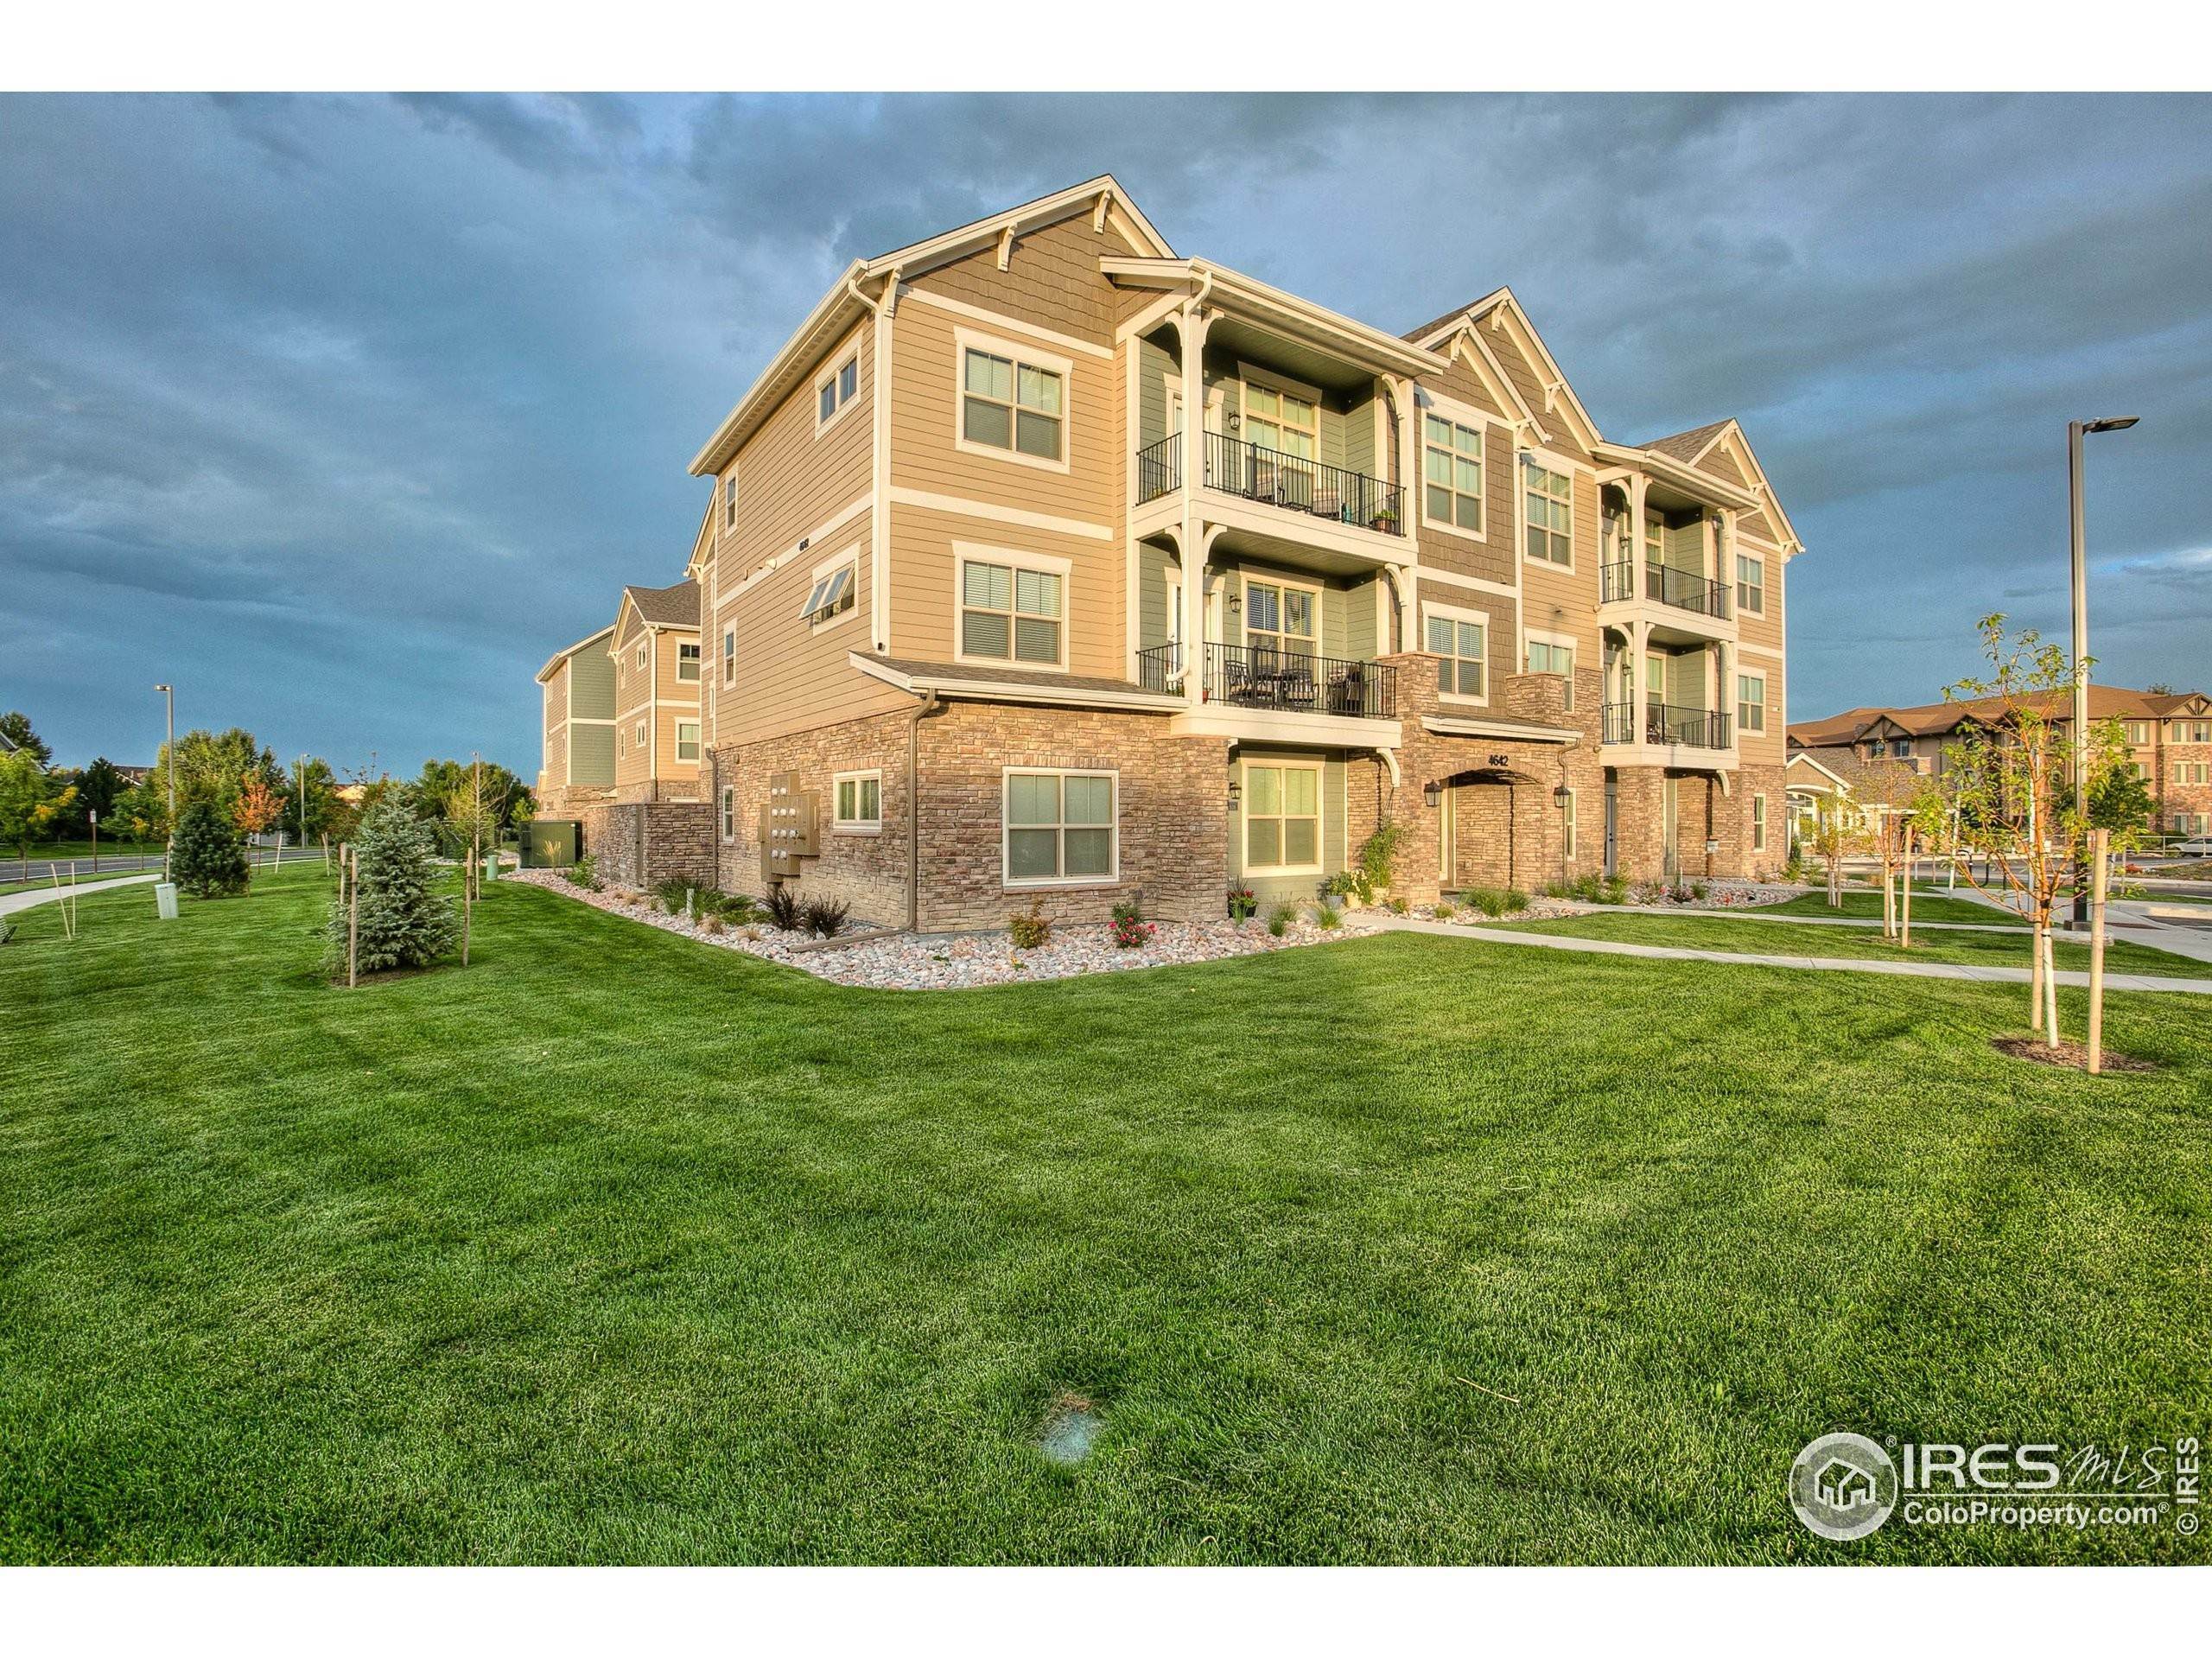 2. Single Family Homes for Active at 4622 Hahns Peak Drive 103 Loveland, Colorado 80538 United States